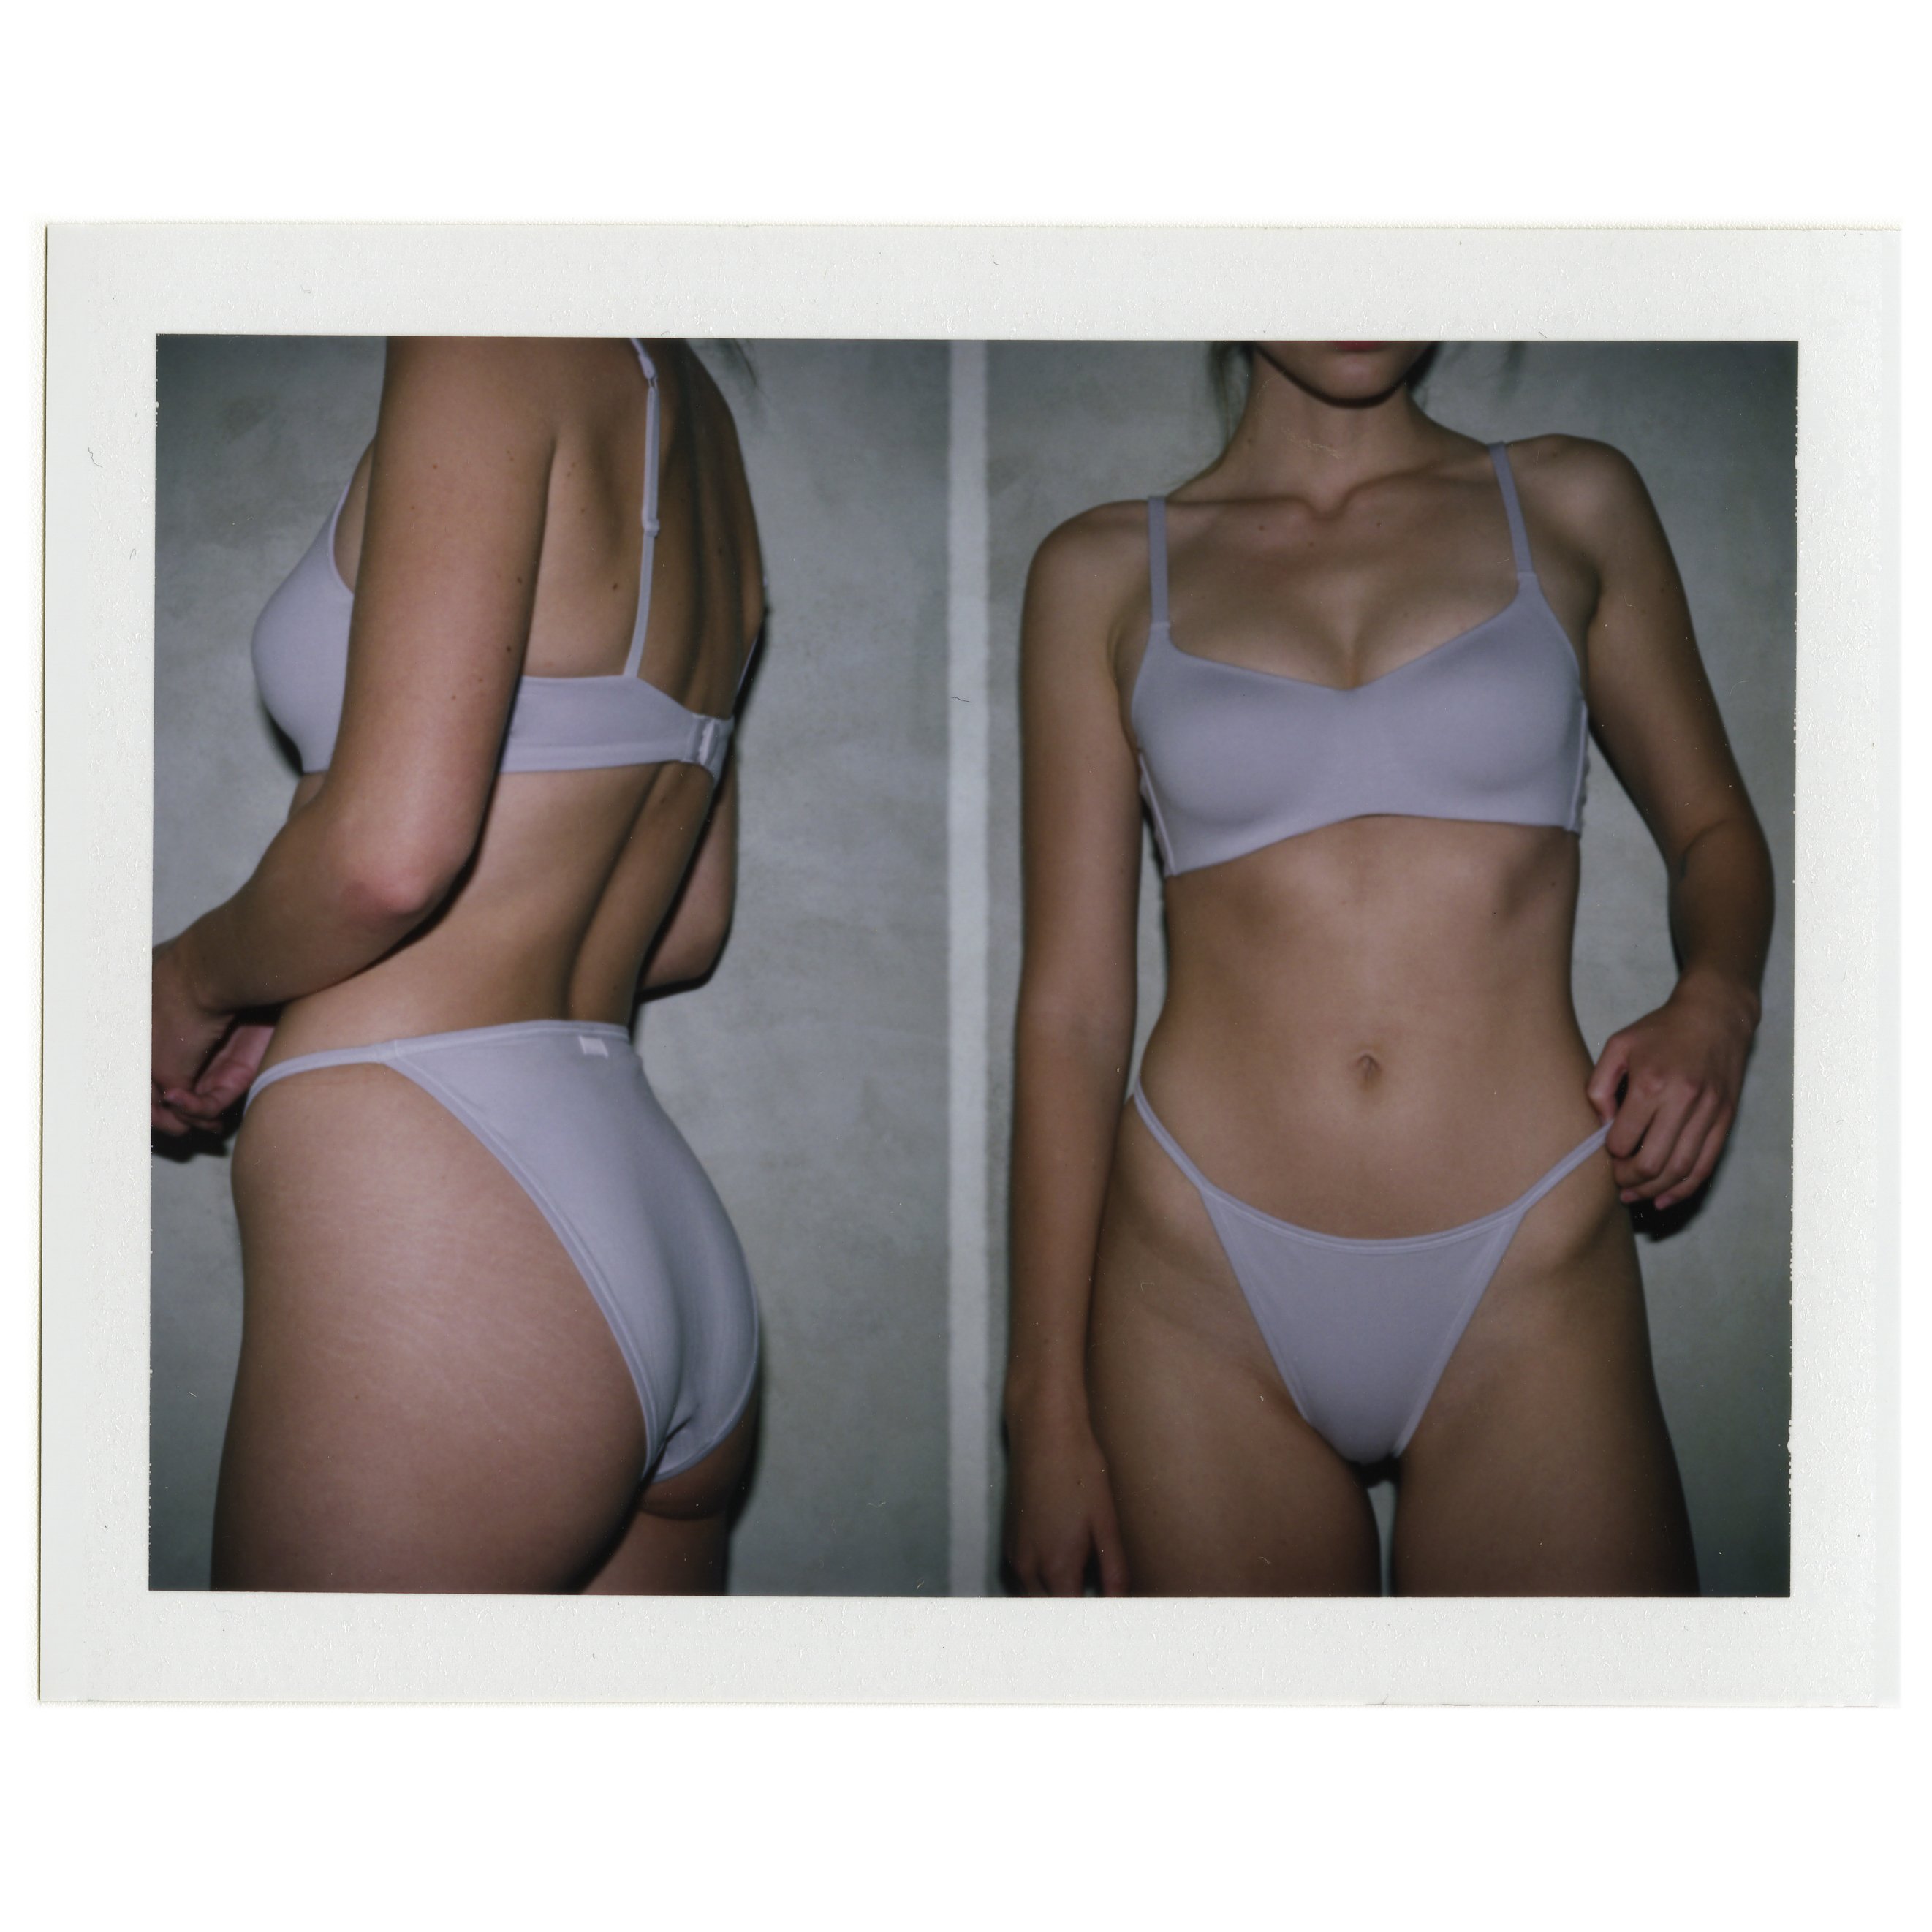 SKIMS on X: The Cotton Molded Bra ($56) and the Cotton String Bikini ($22)  in Iris Mica - available now in select sizes and colors at   Shop the Cotton Collection now